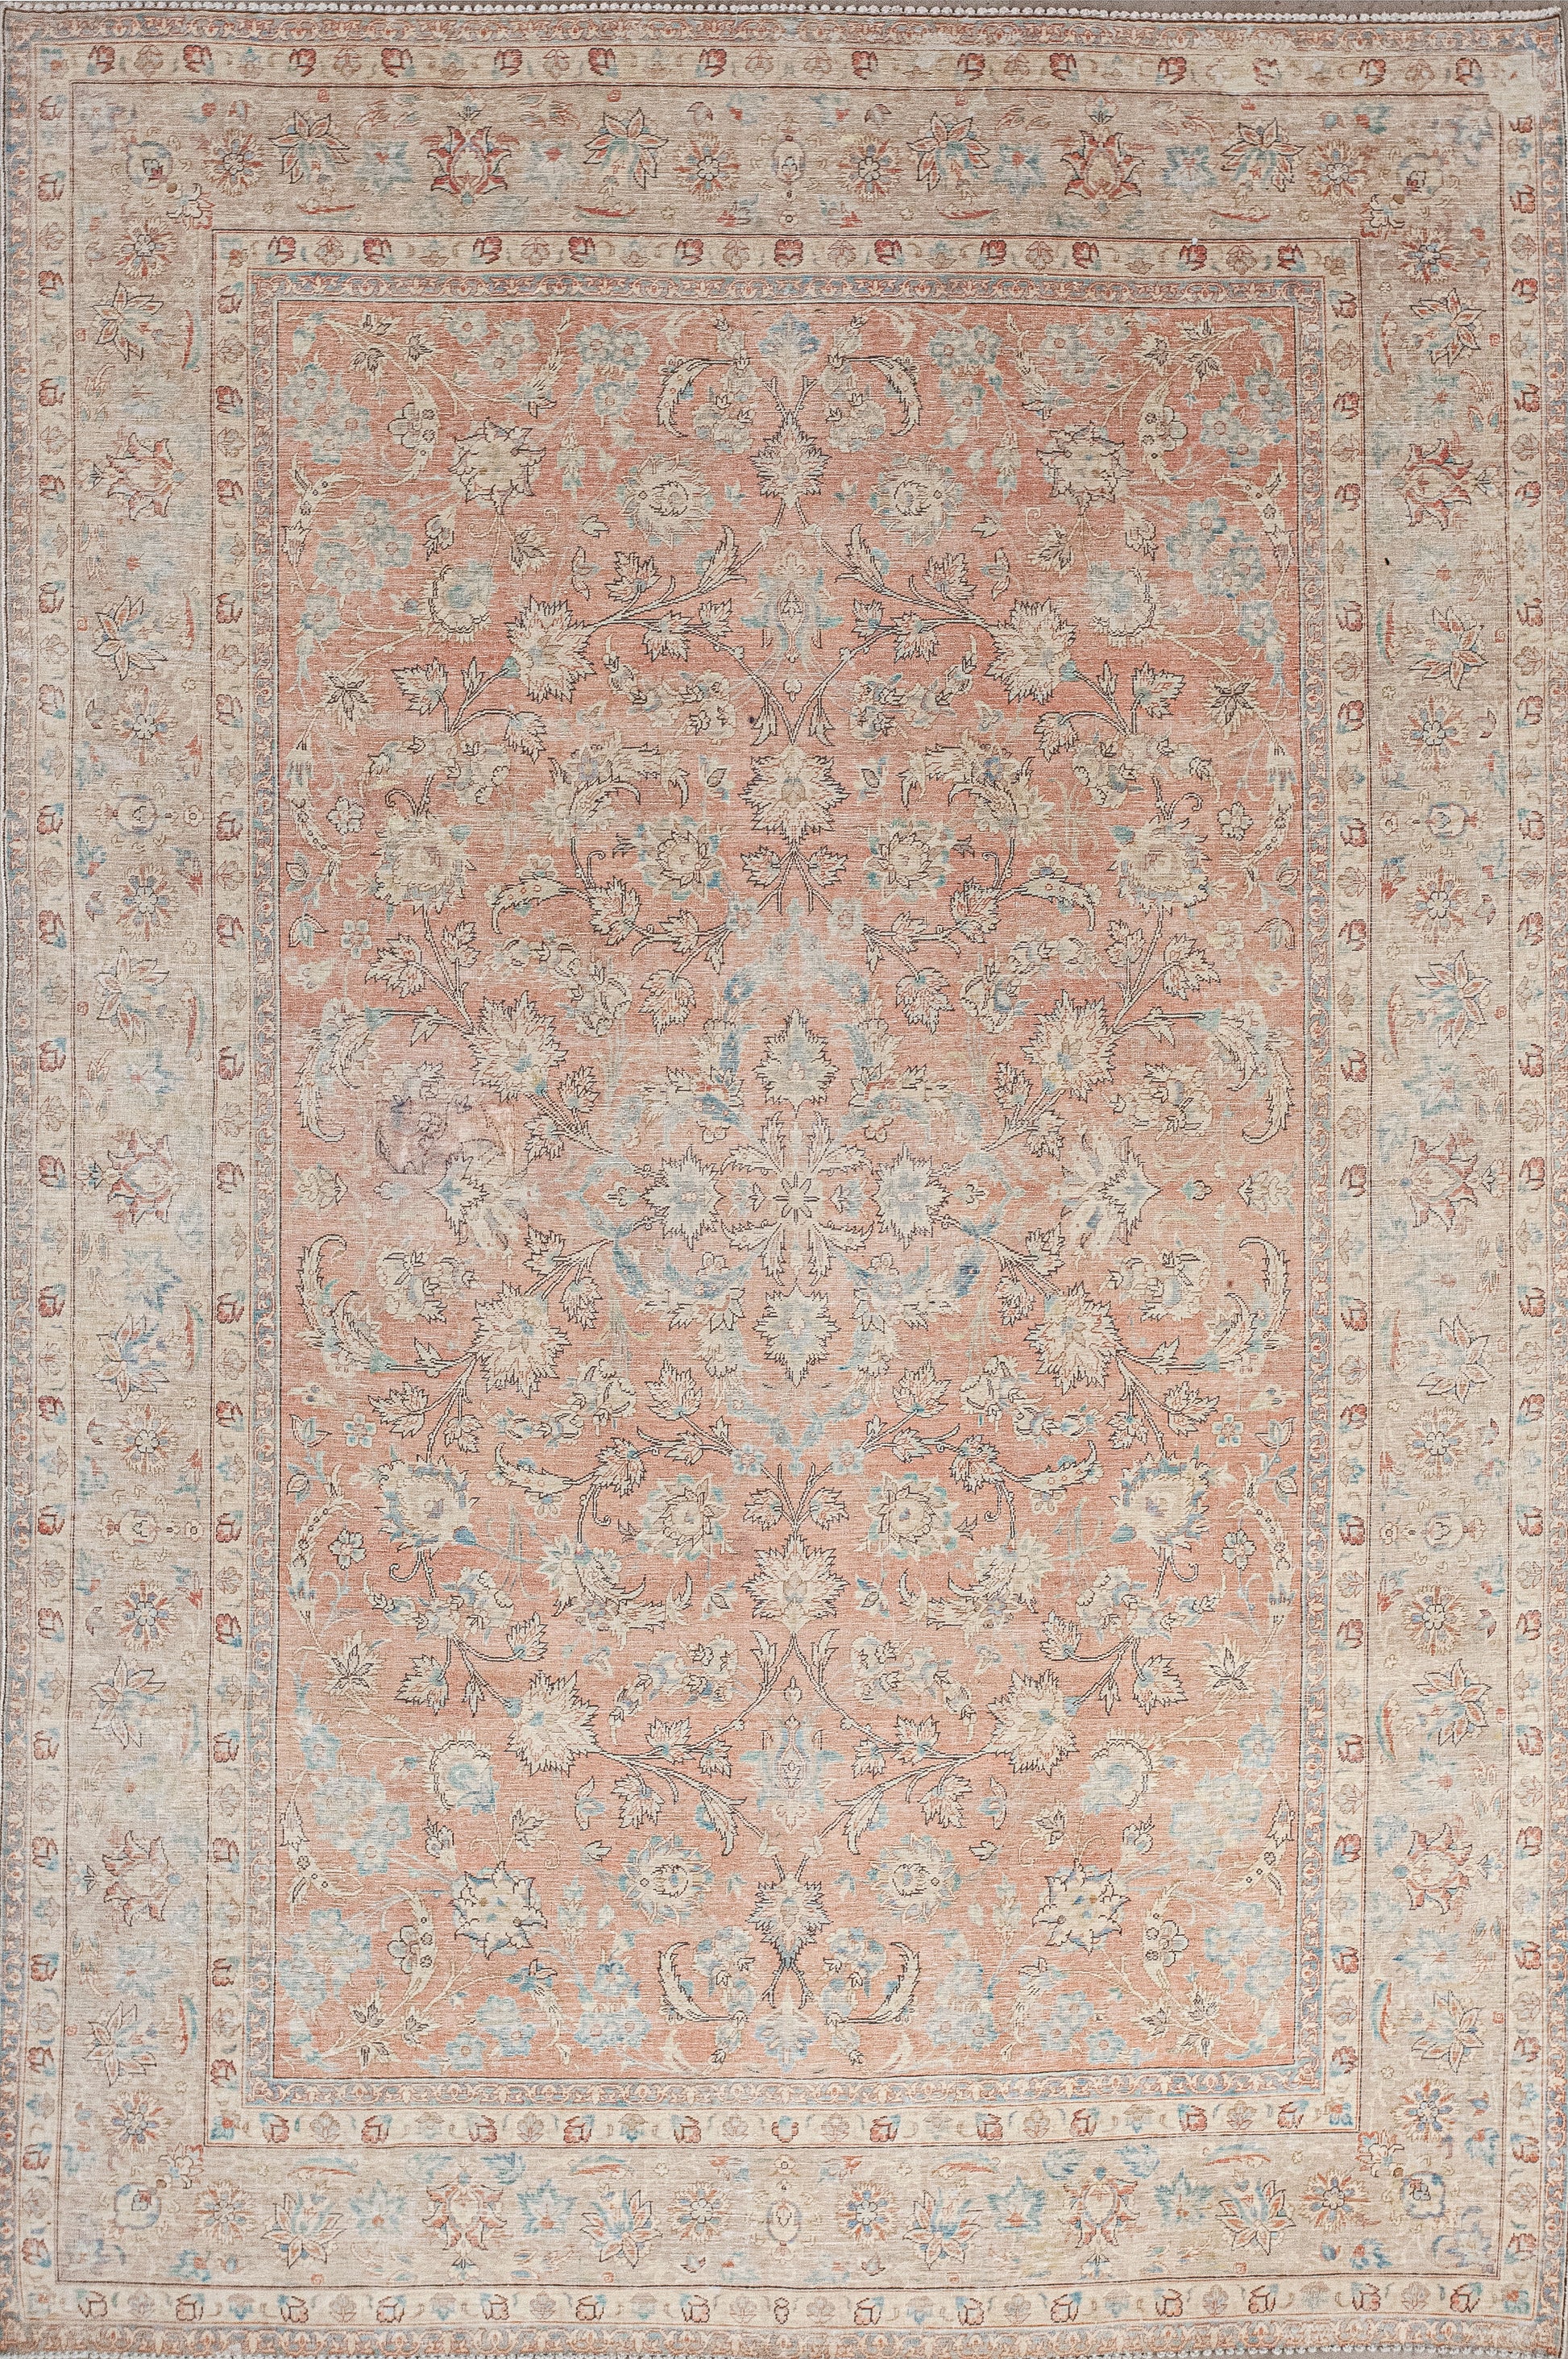 This captivating carpet is perfect for living room and dining room. The color palette comes in varieties of beige for the perimeter, blue for the highlights, and mostly a light-tangerine shade that is believed to aid digestion. 